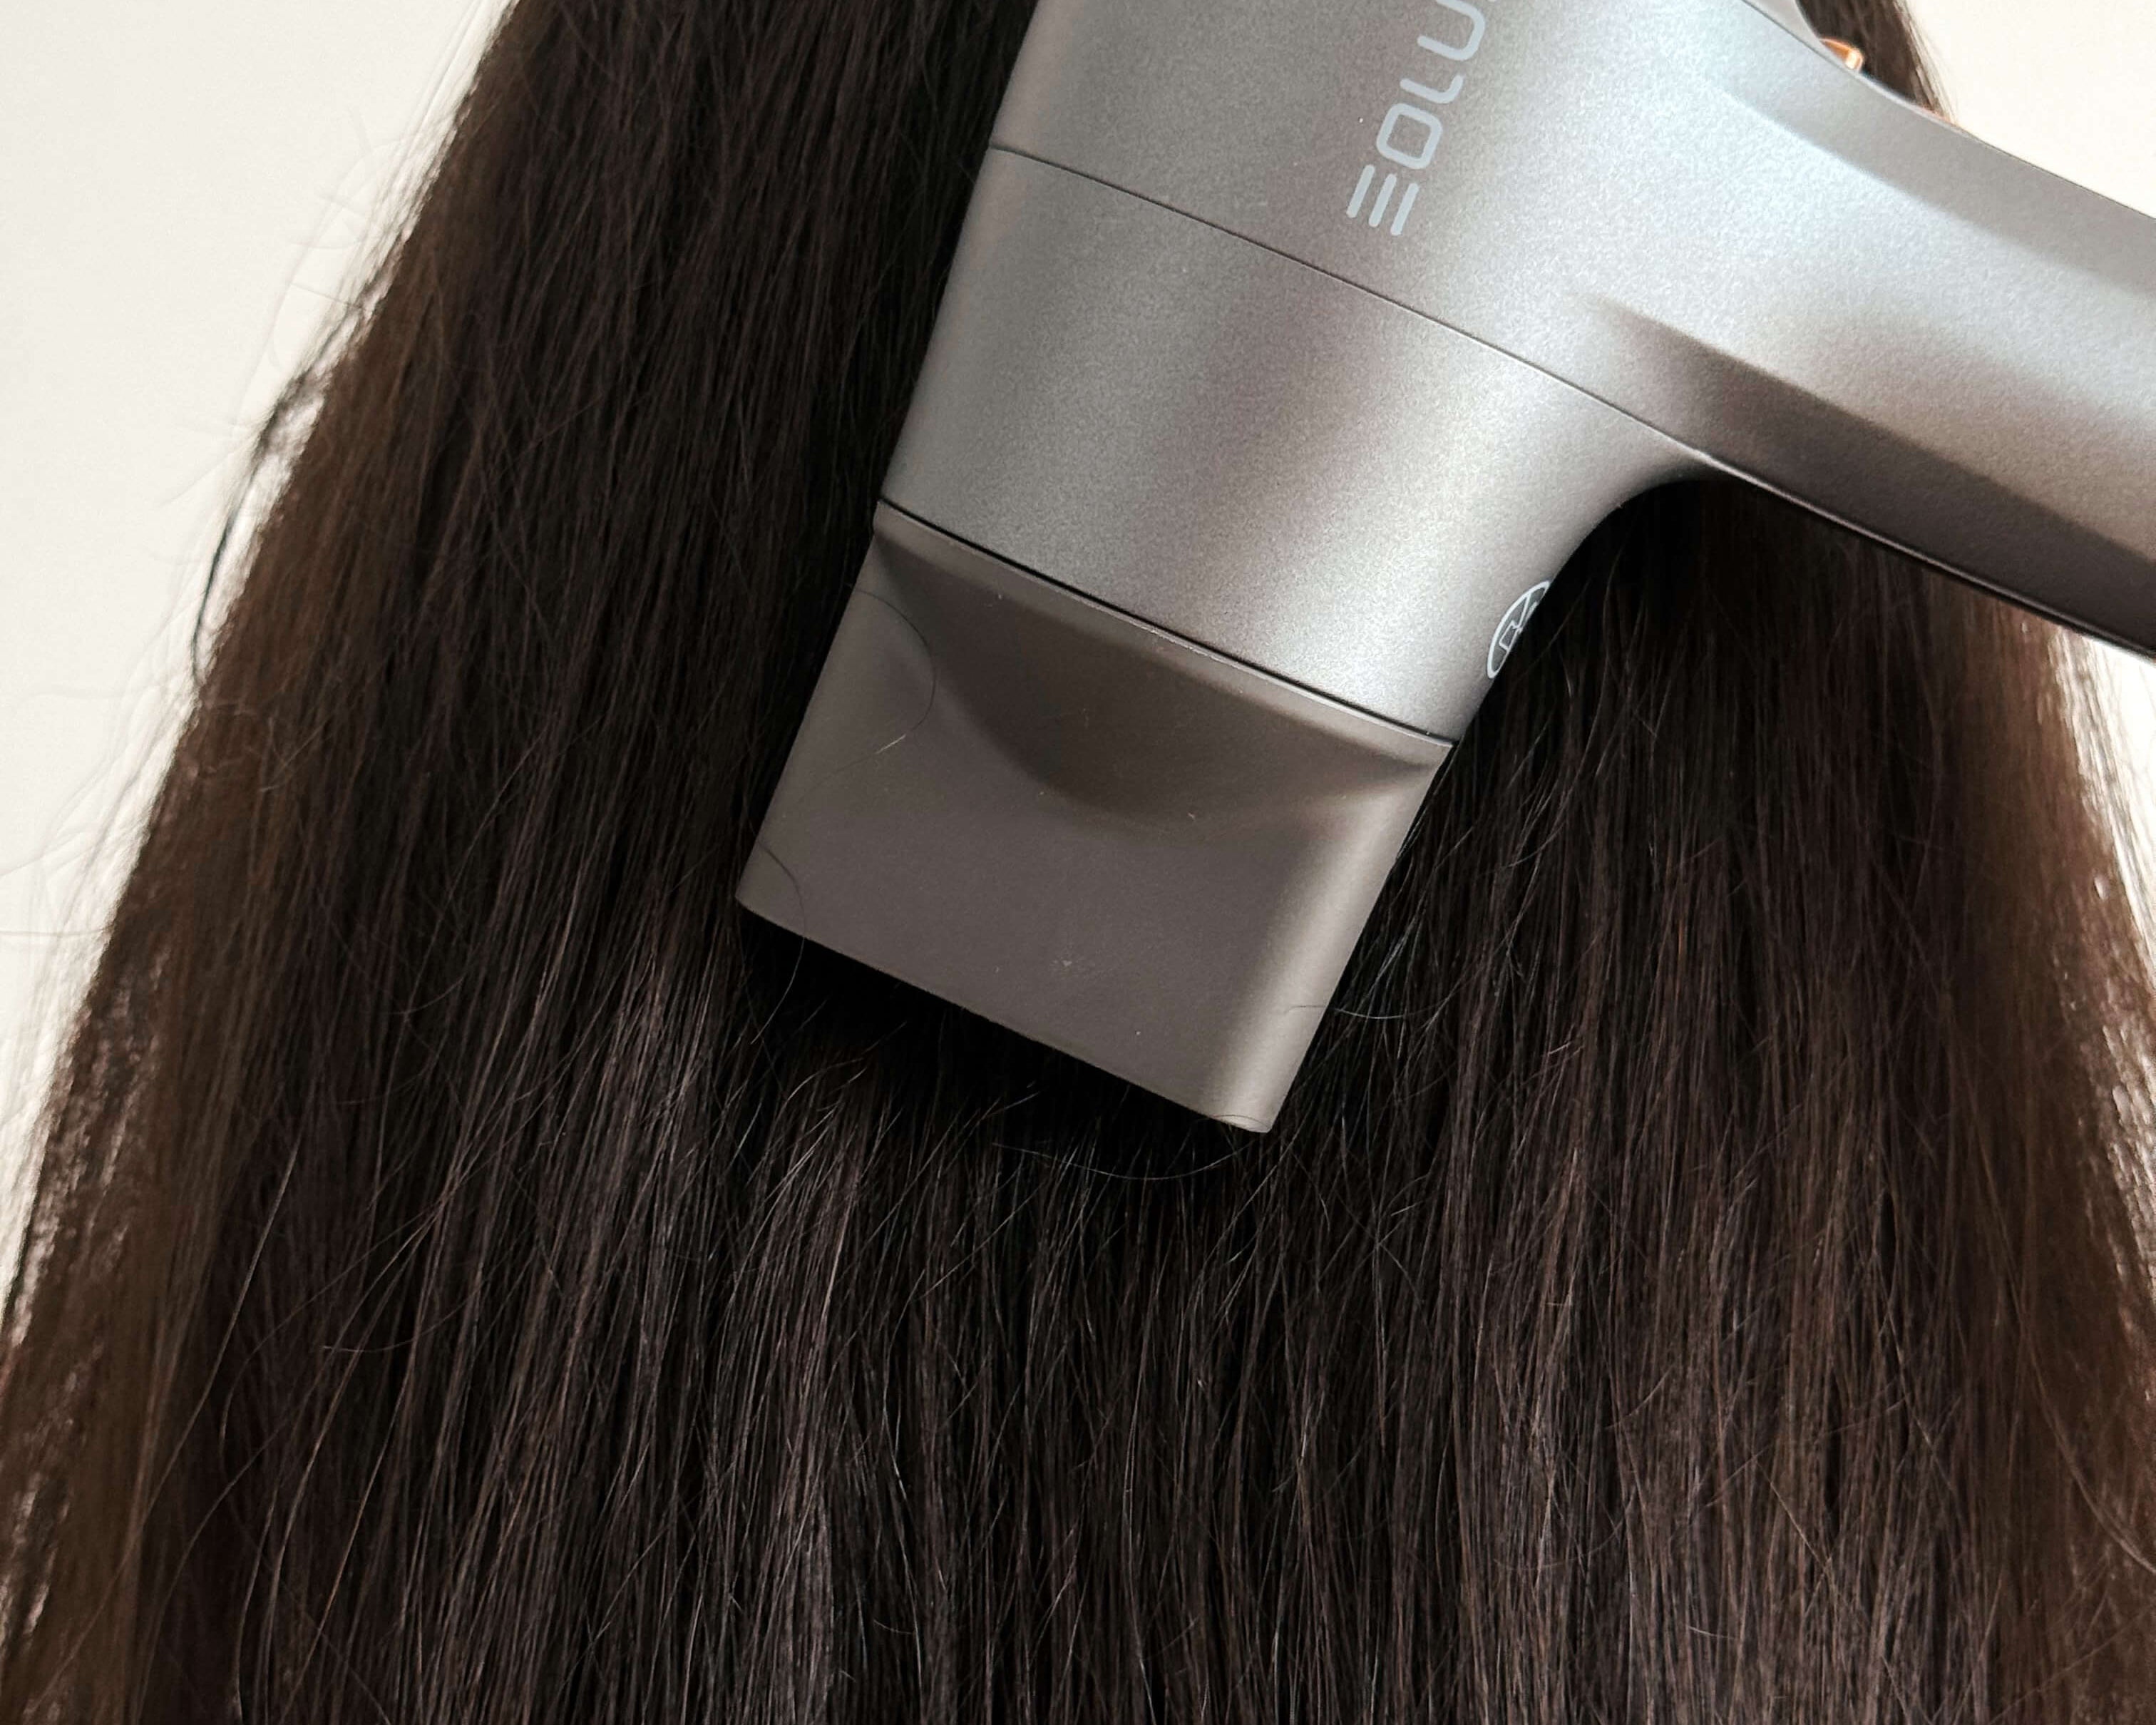 Hair dryer for reduce frizz, enhance shine, and speed up drying time